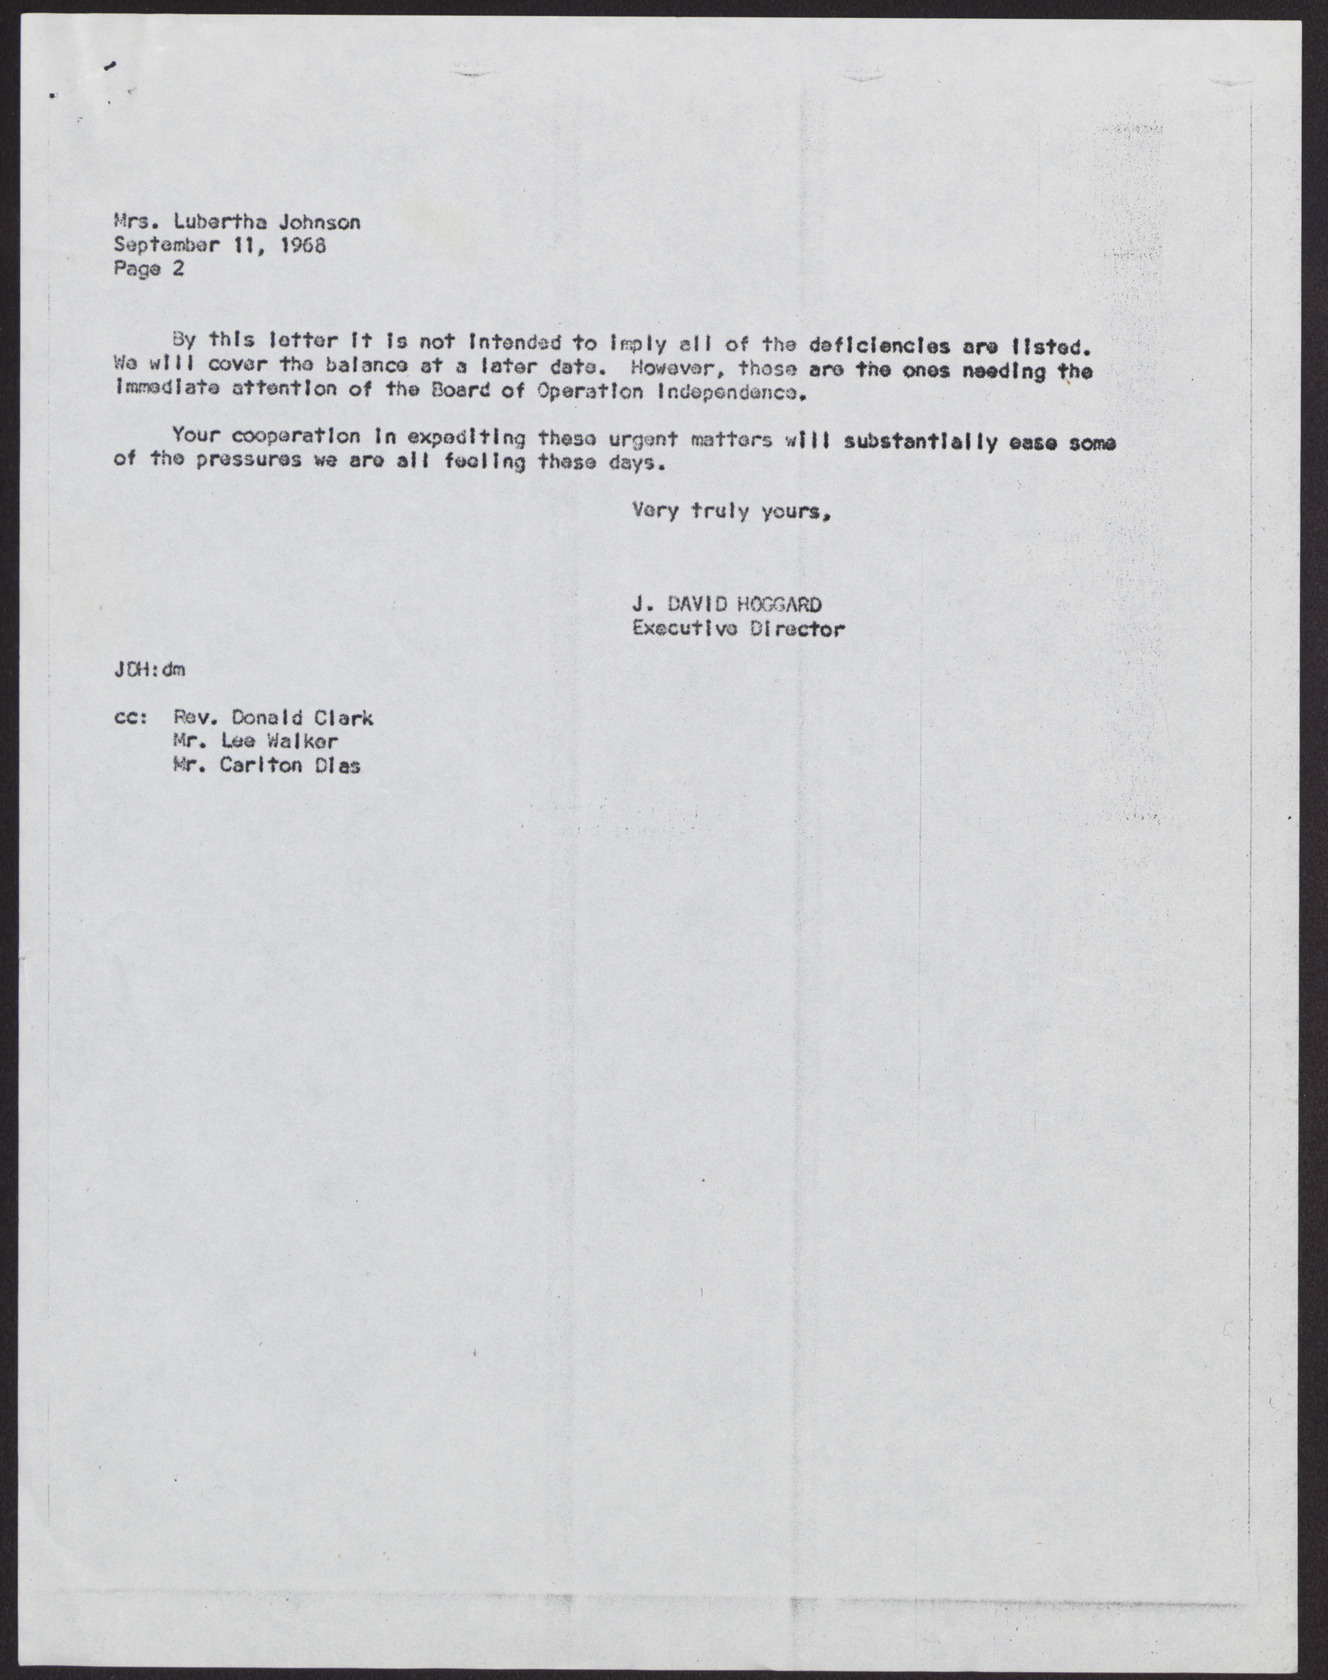 Letter to Mrs. Lubertha M. Johnson from J. David Hoggard (2 pages), September 11, 1968, page 2